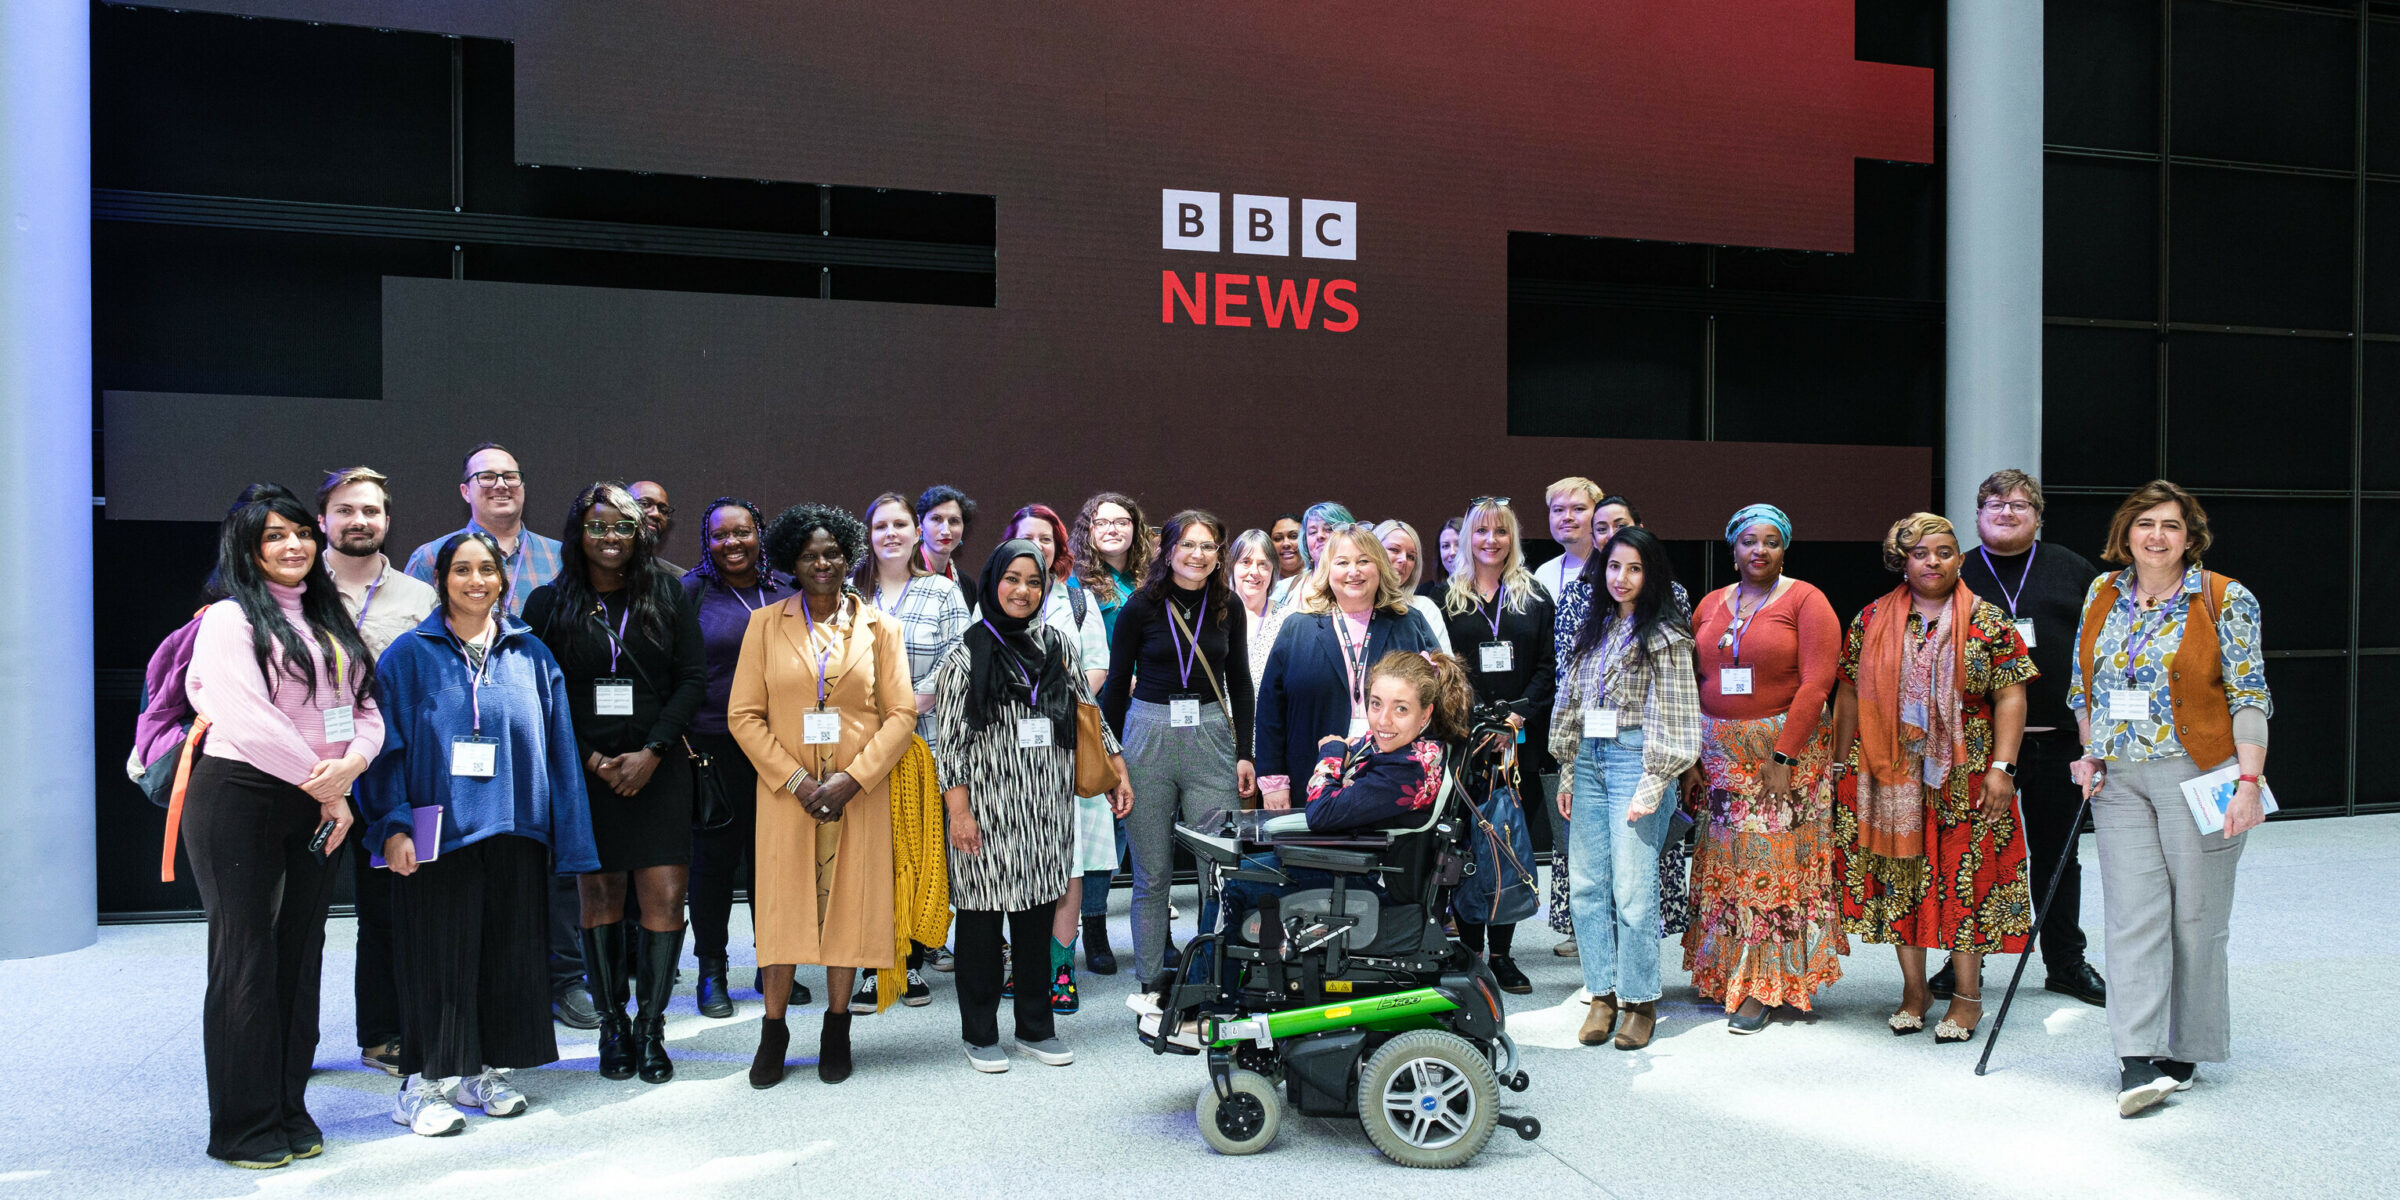 mentees at bbc wales in cardiff